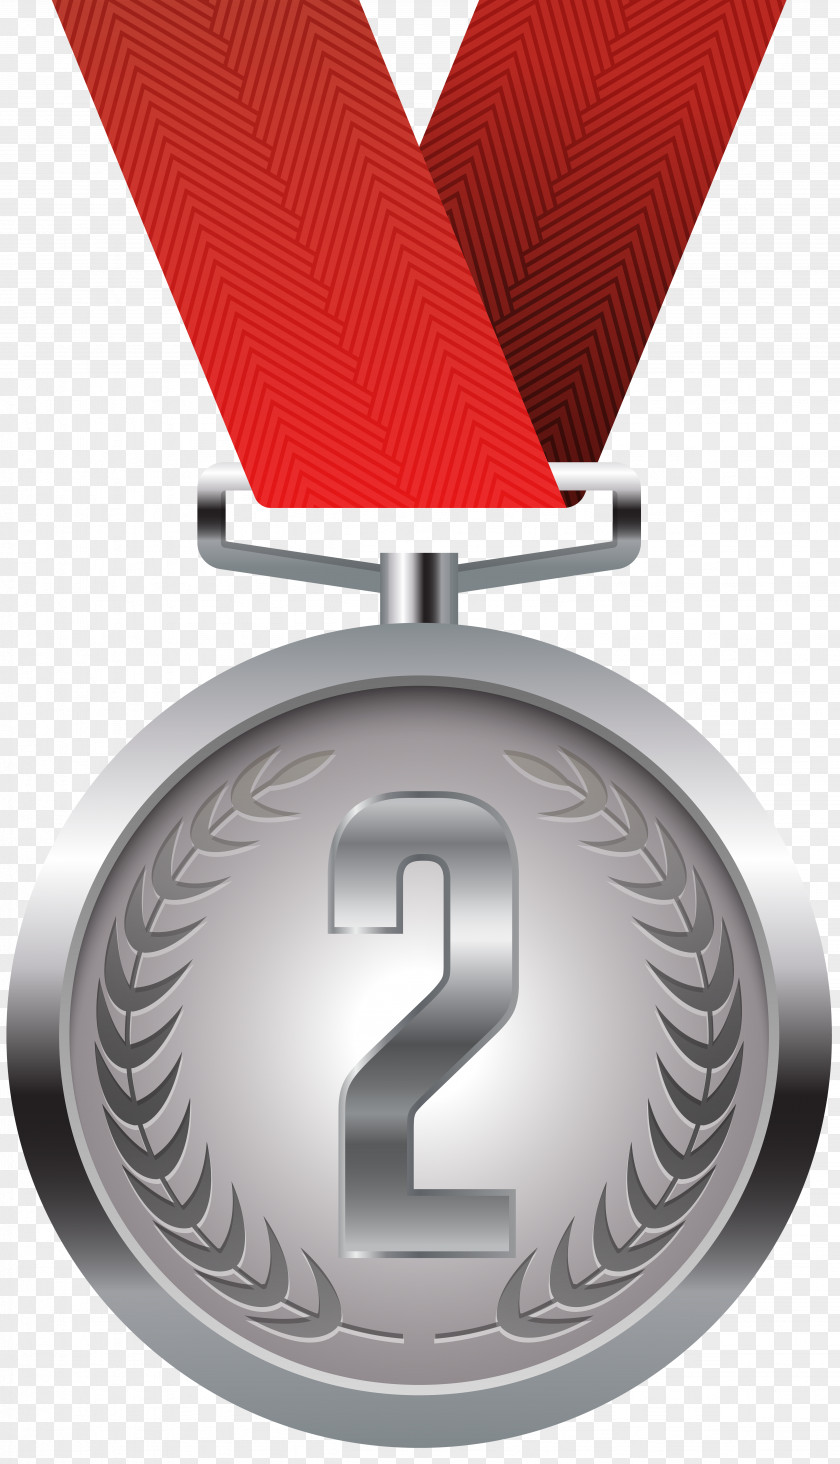 Medal Clip Art Gold Silver PNG